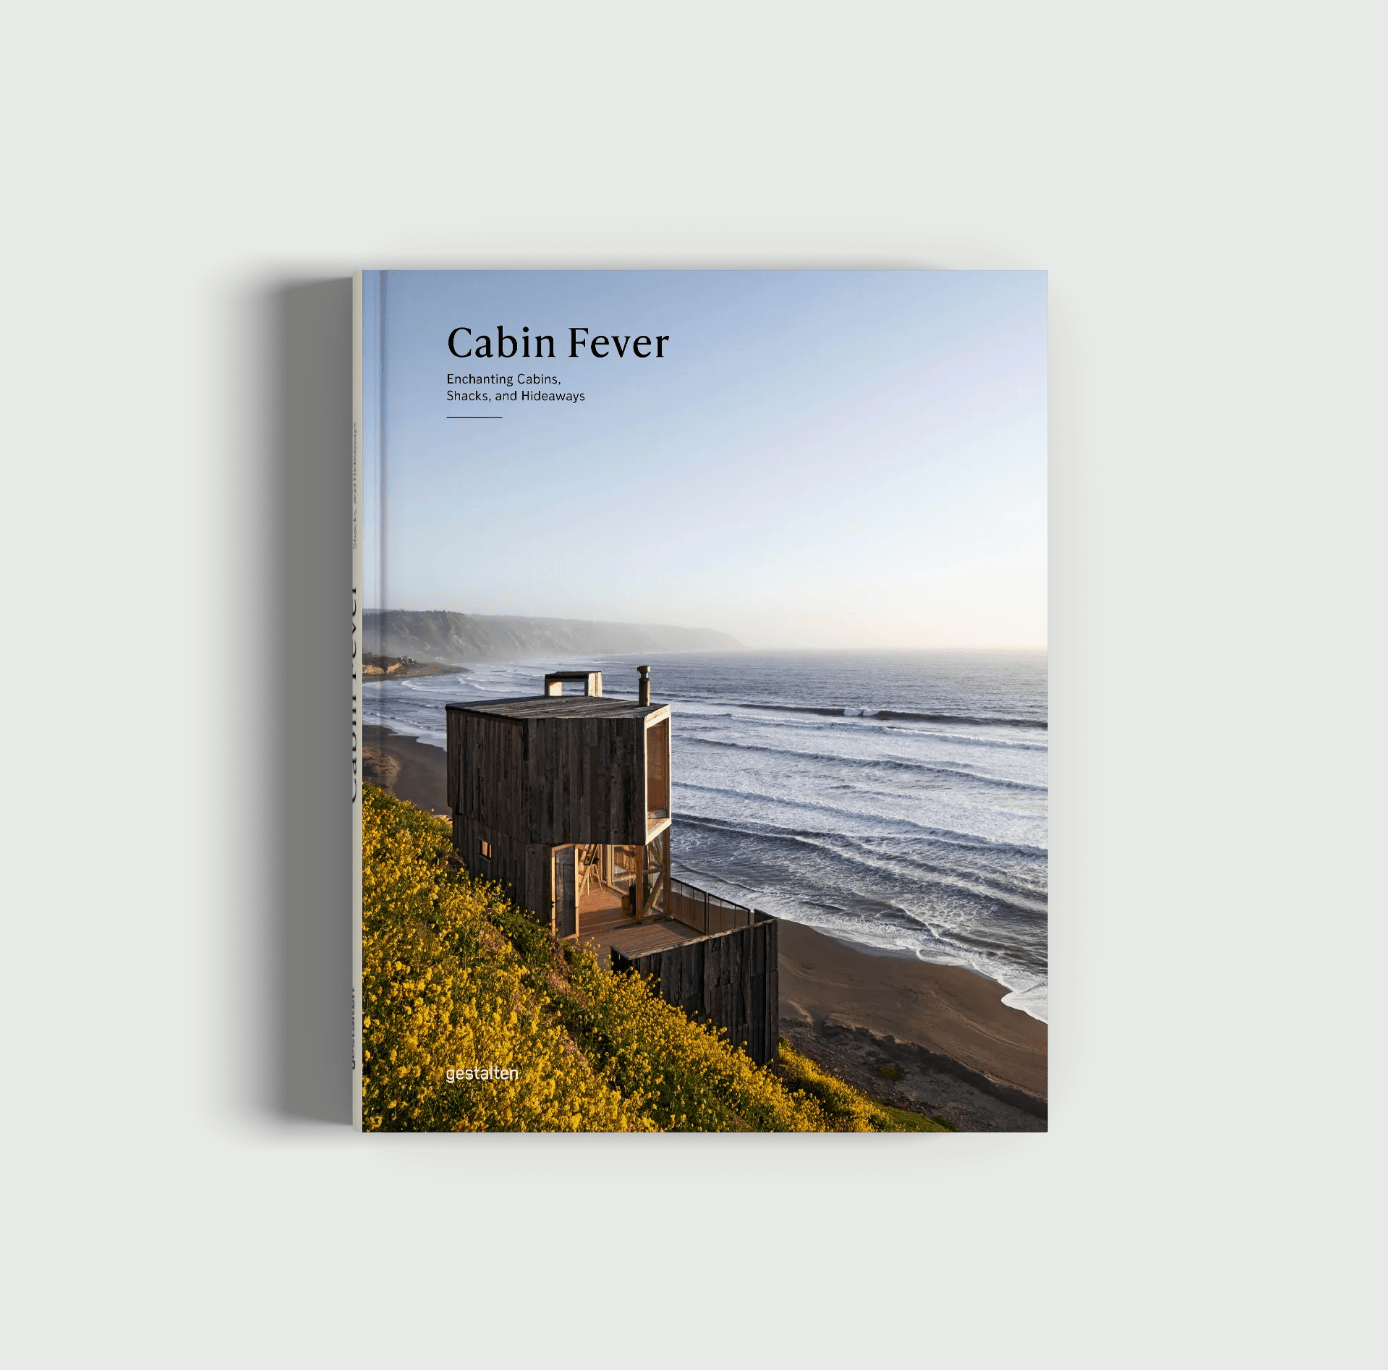 book with a wooden cabin on the beach in the cover